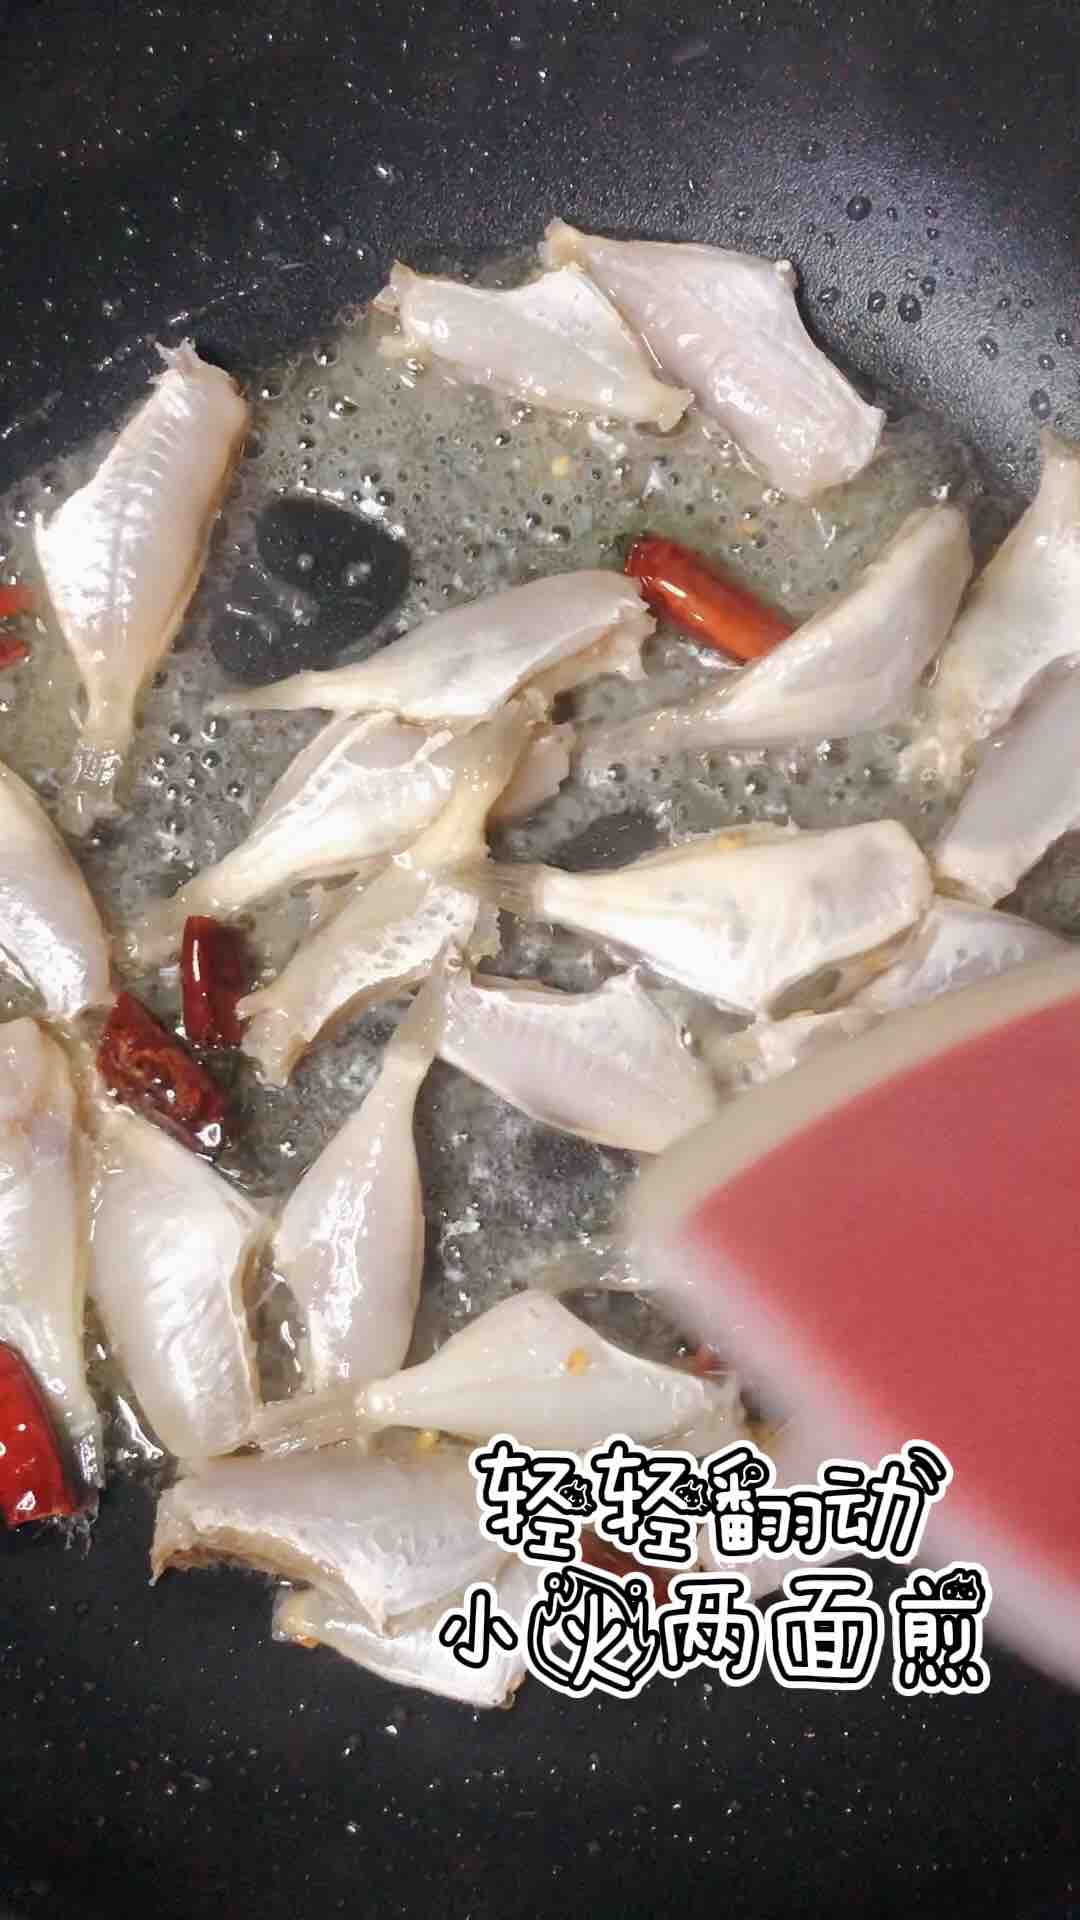 Anchovies in Sauce recipe